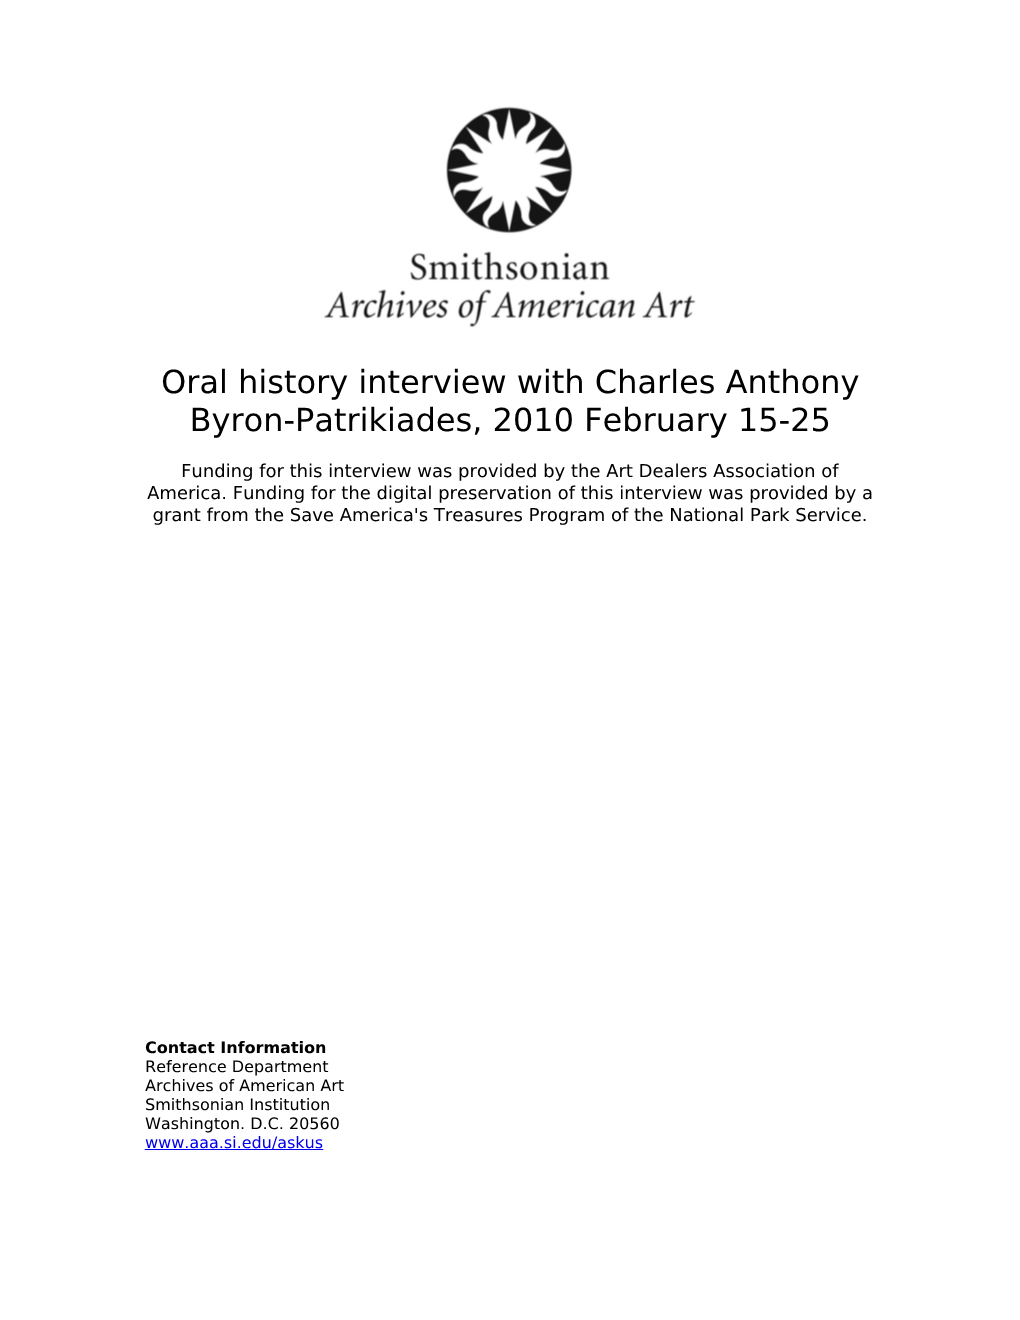 Oral History Interview with Charles Anthony Byron-Patrikiades, 2010 February 15-25